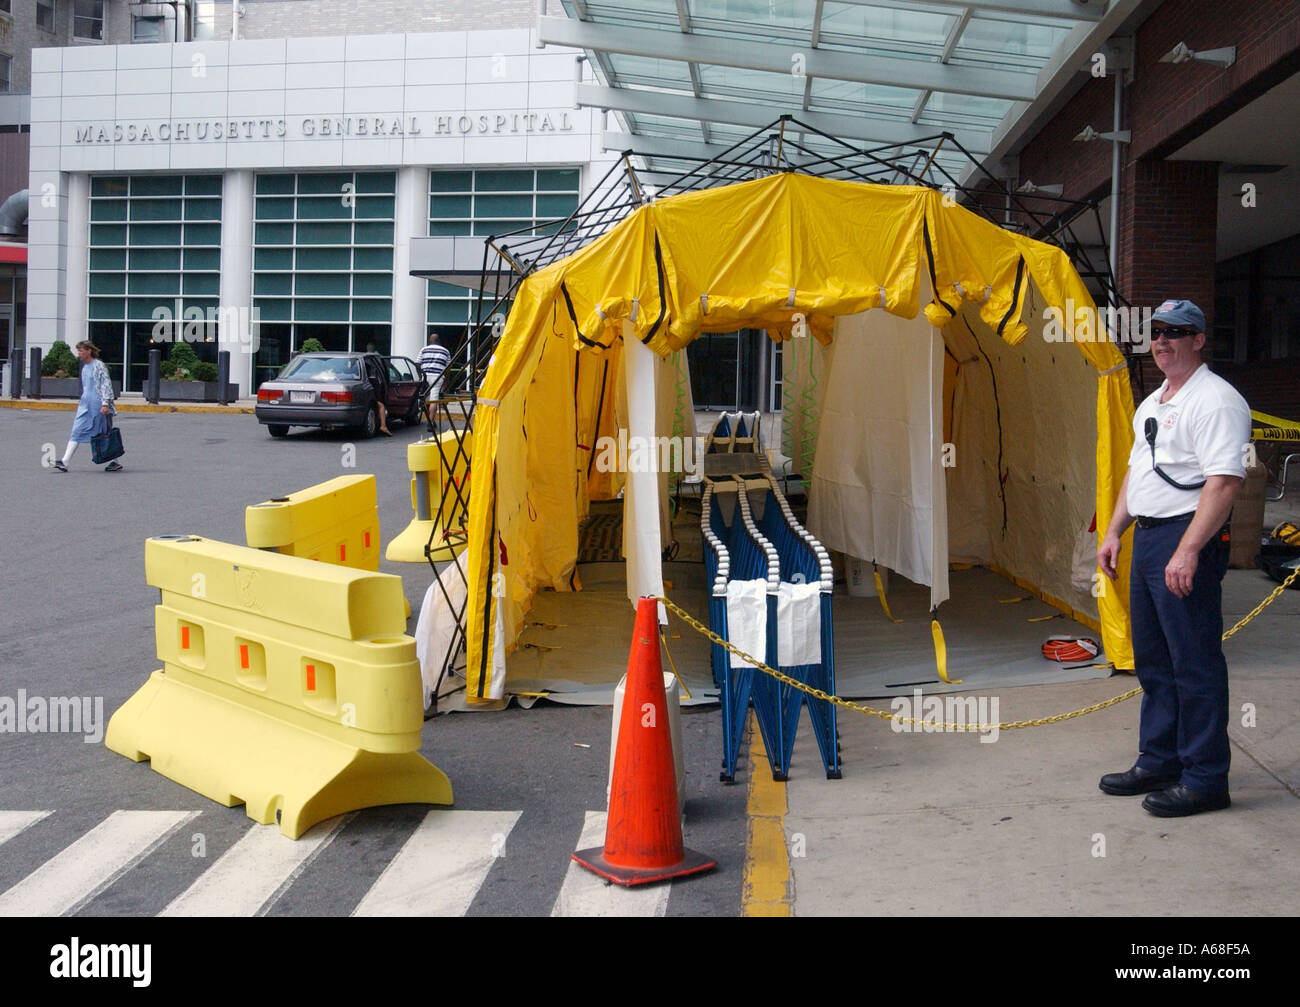 A chemical decontamination tent outside Massachusetts General Hospital Stock Photo